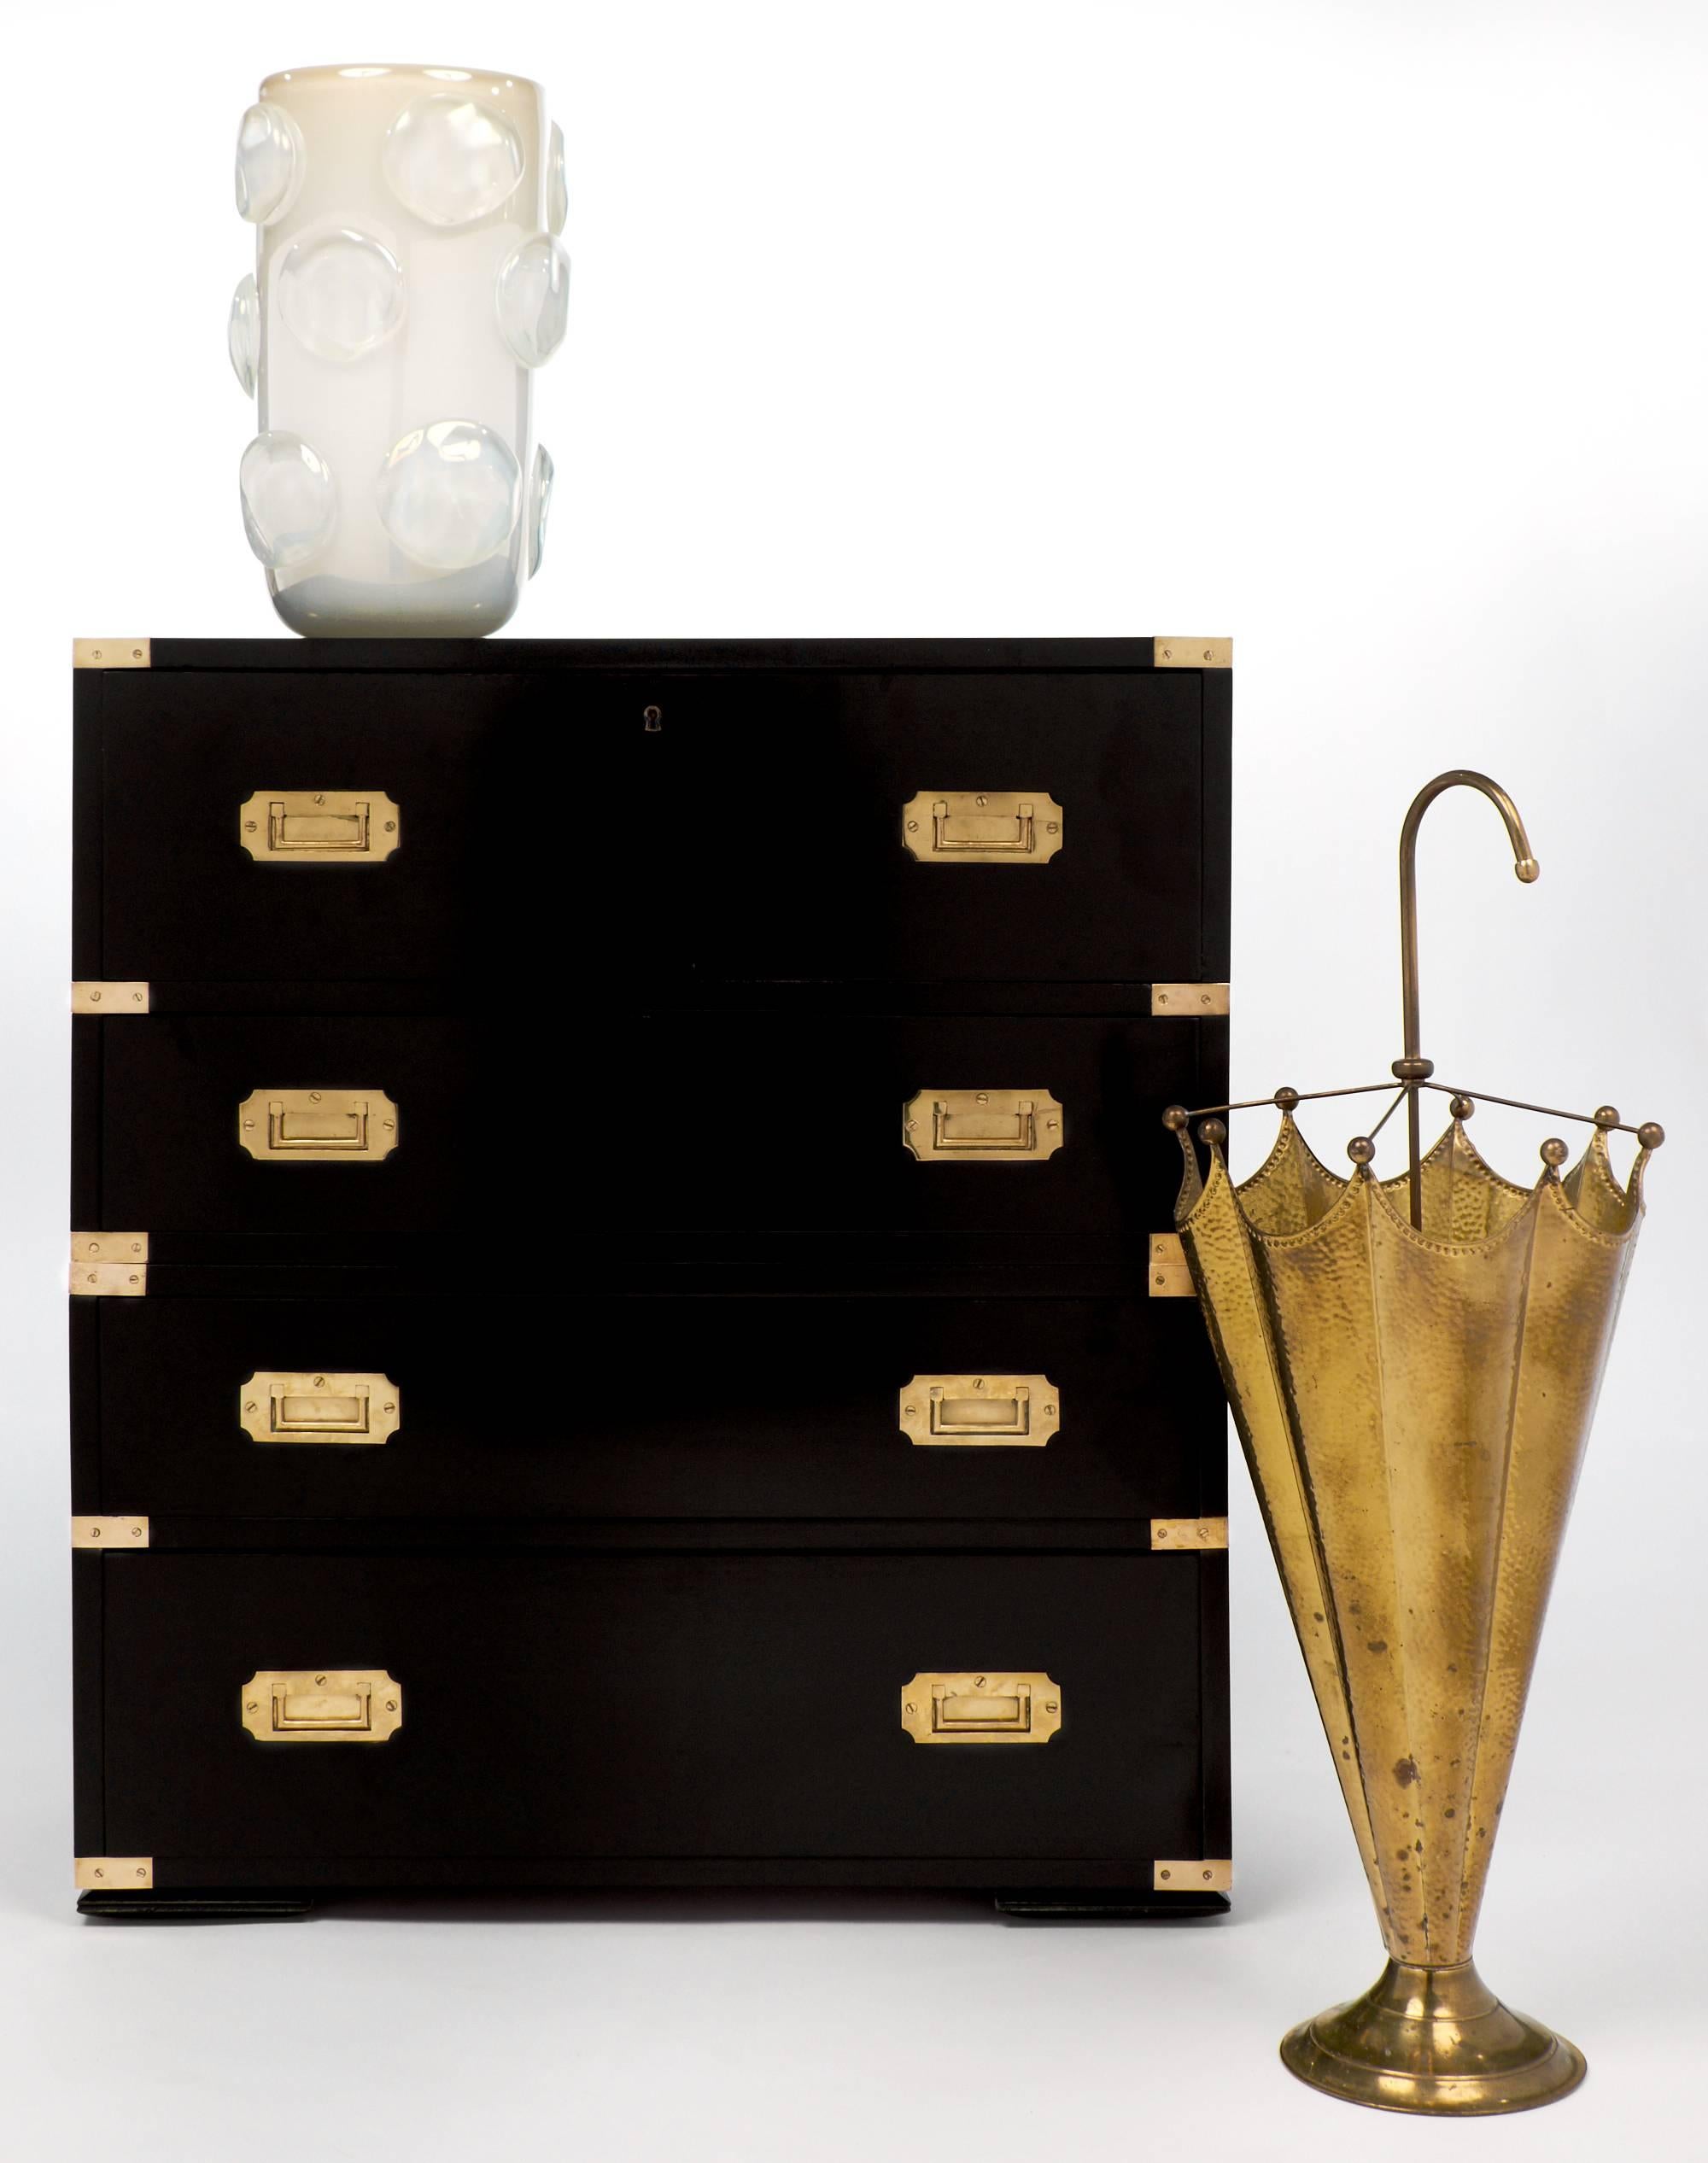 Vintage campaign style chest with the iconic brass corners and inset handles, this piece also separates at the middle for easy travel. The top drawer front drops down as a leather writing surface, embossed with a gold leaf frieze, with several